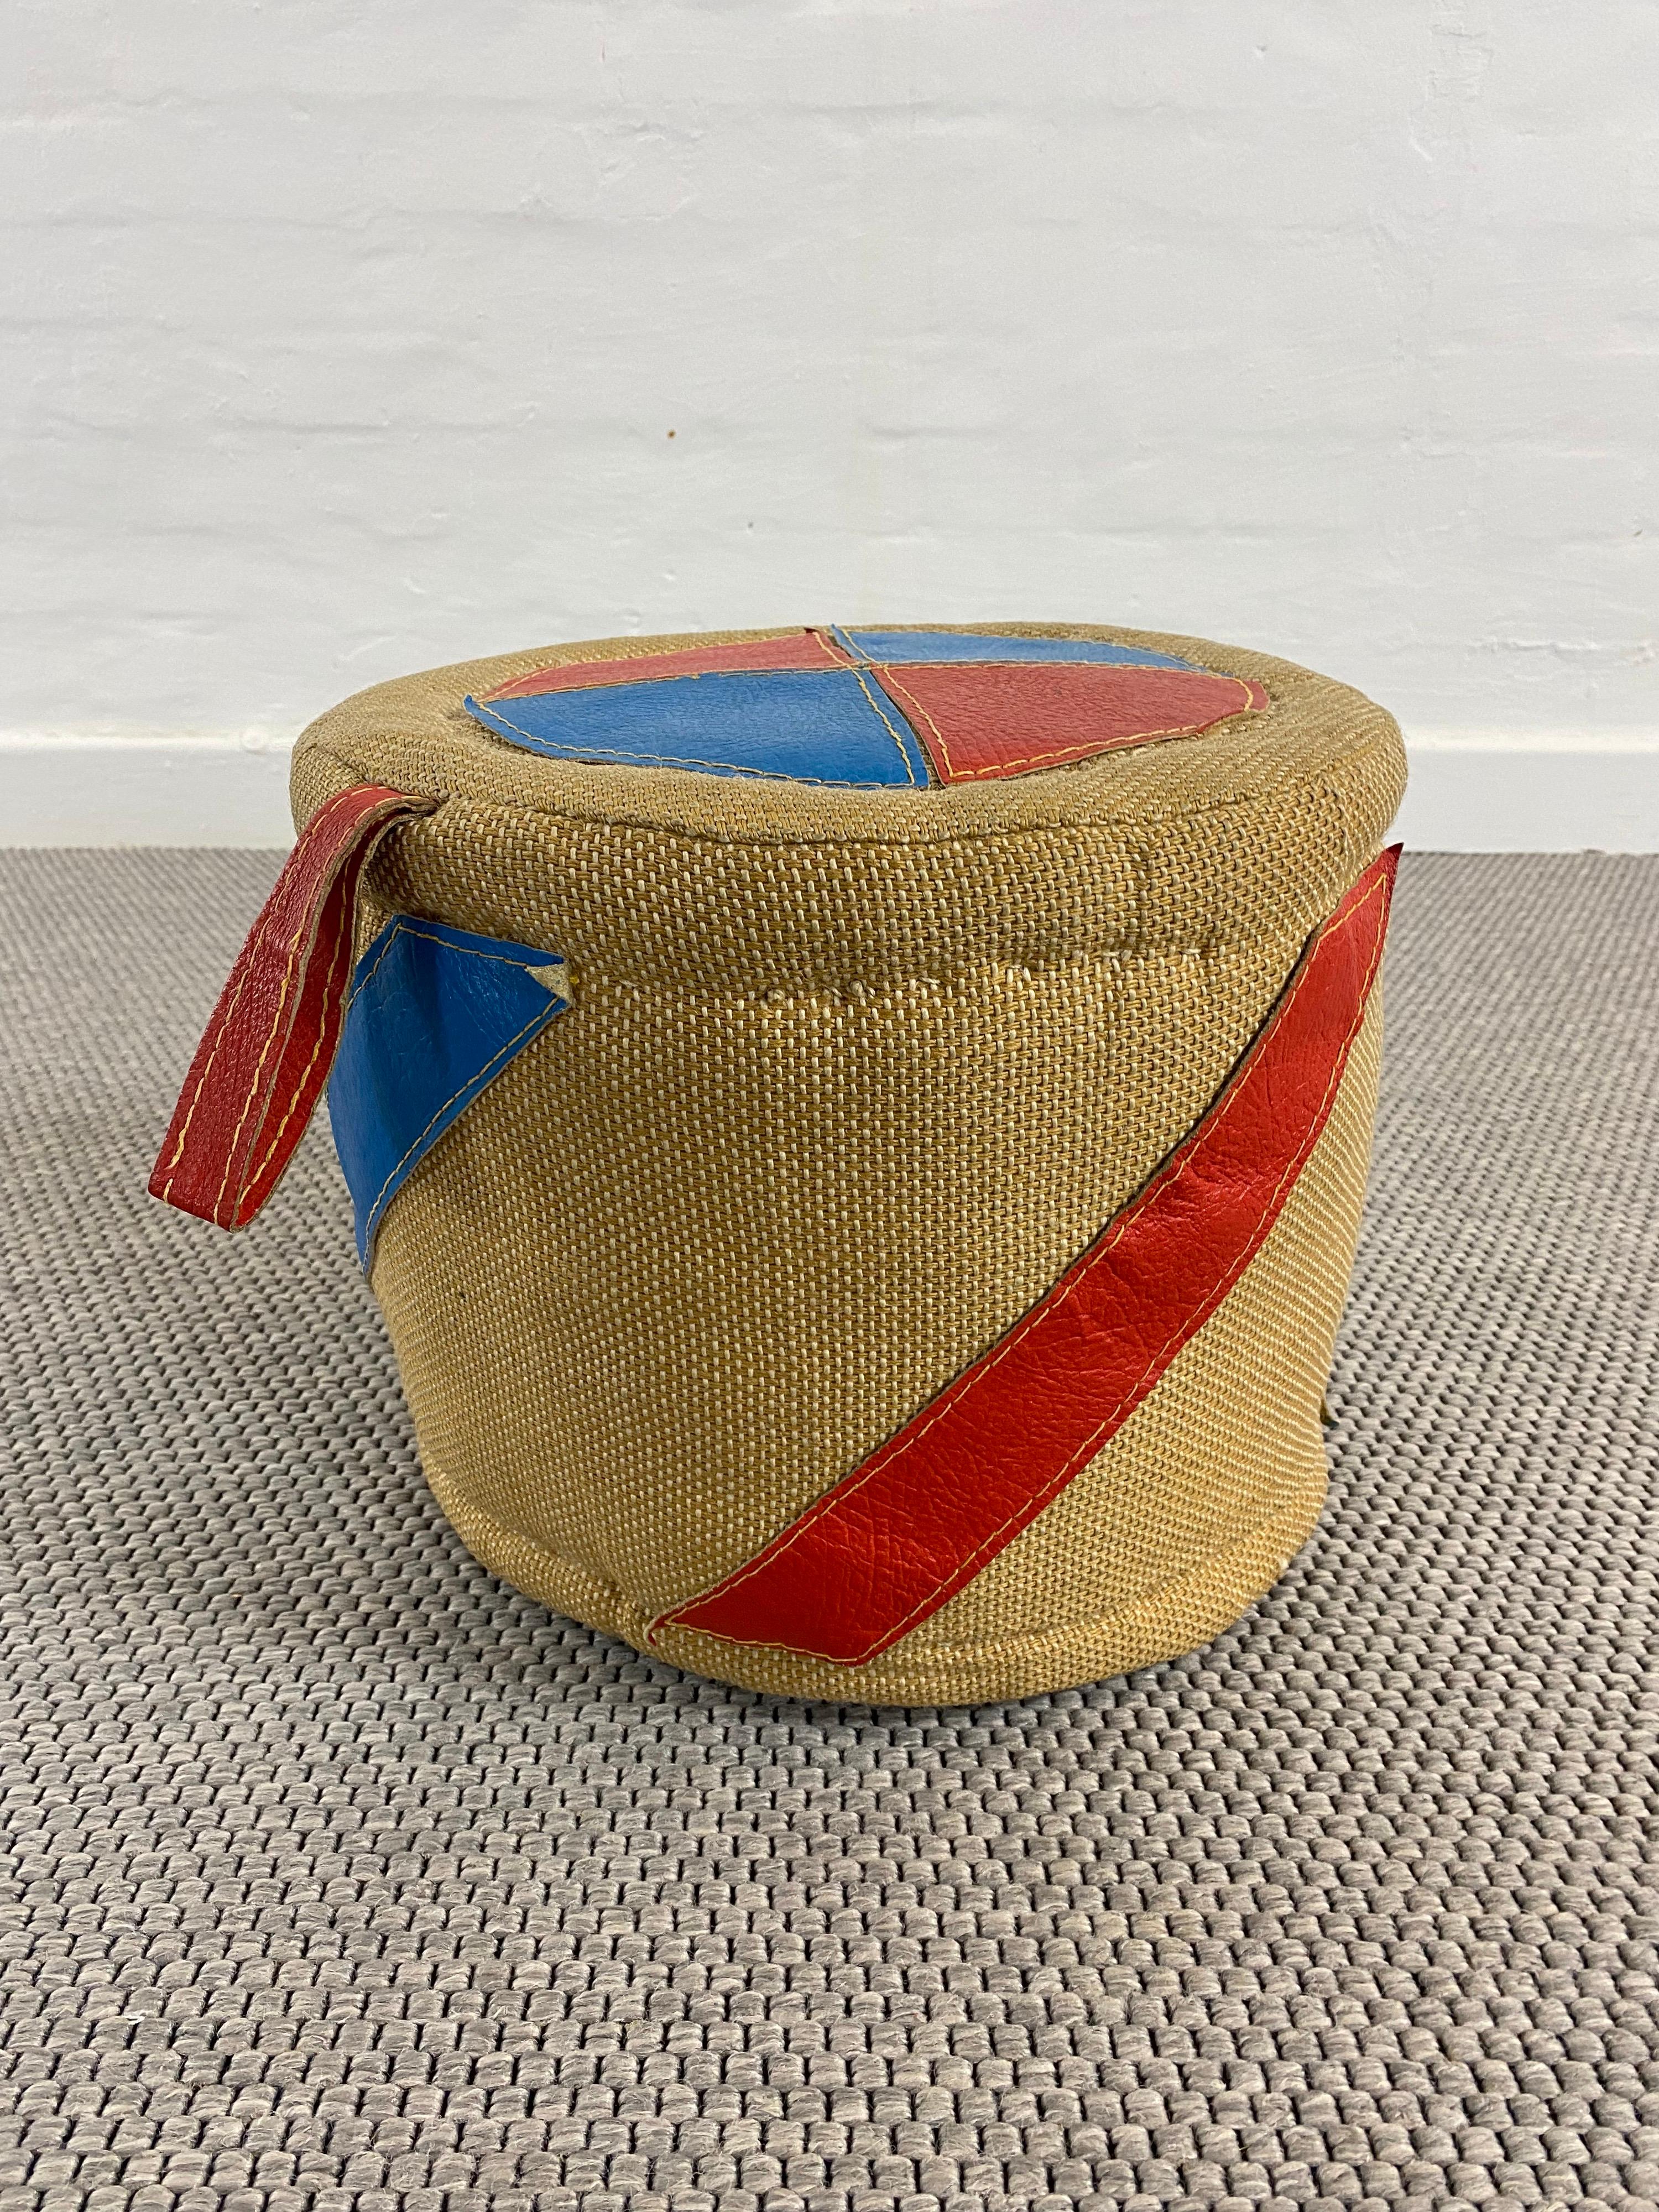 Late 20th Century Pouf, Therapeutic Toy in Jute, Material by Renate Müller, Germany, GDR For Sale